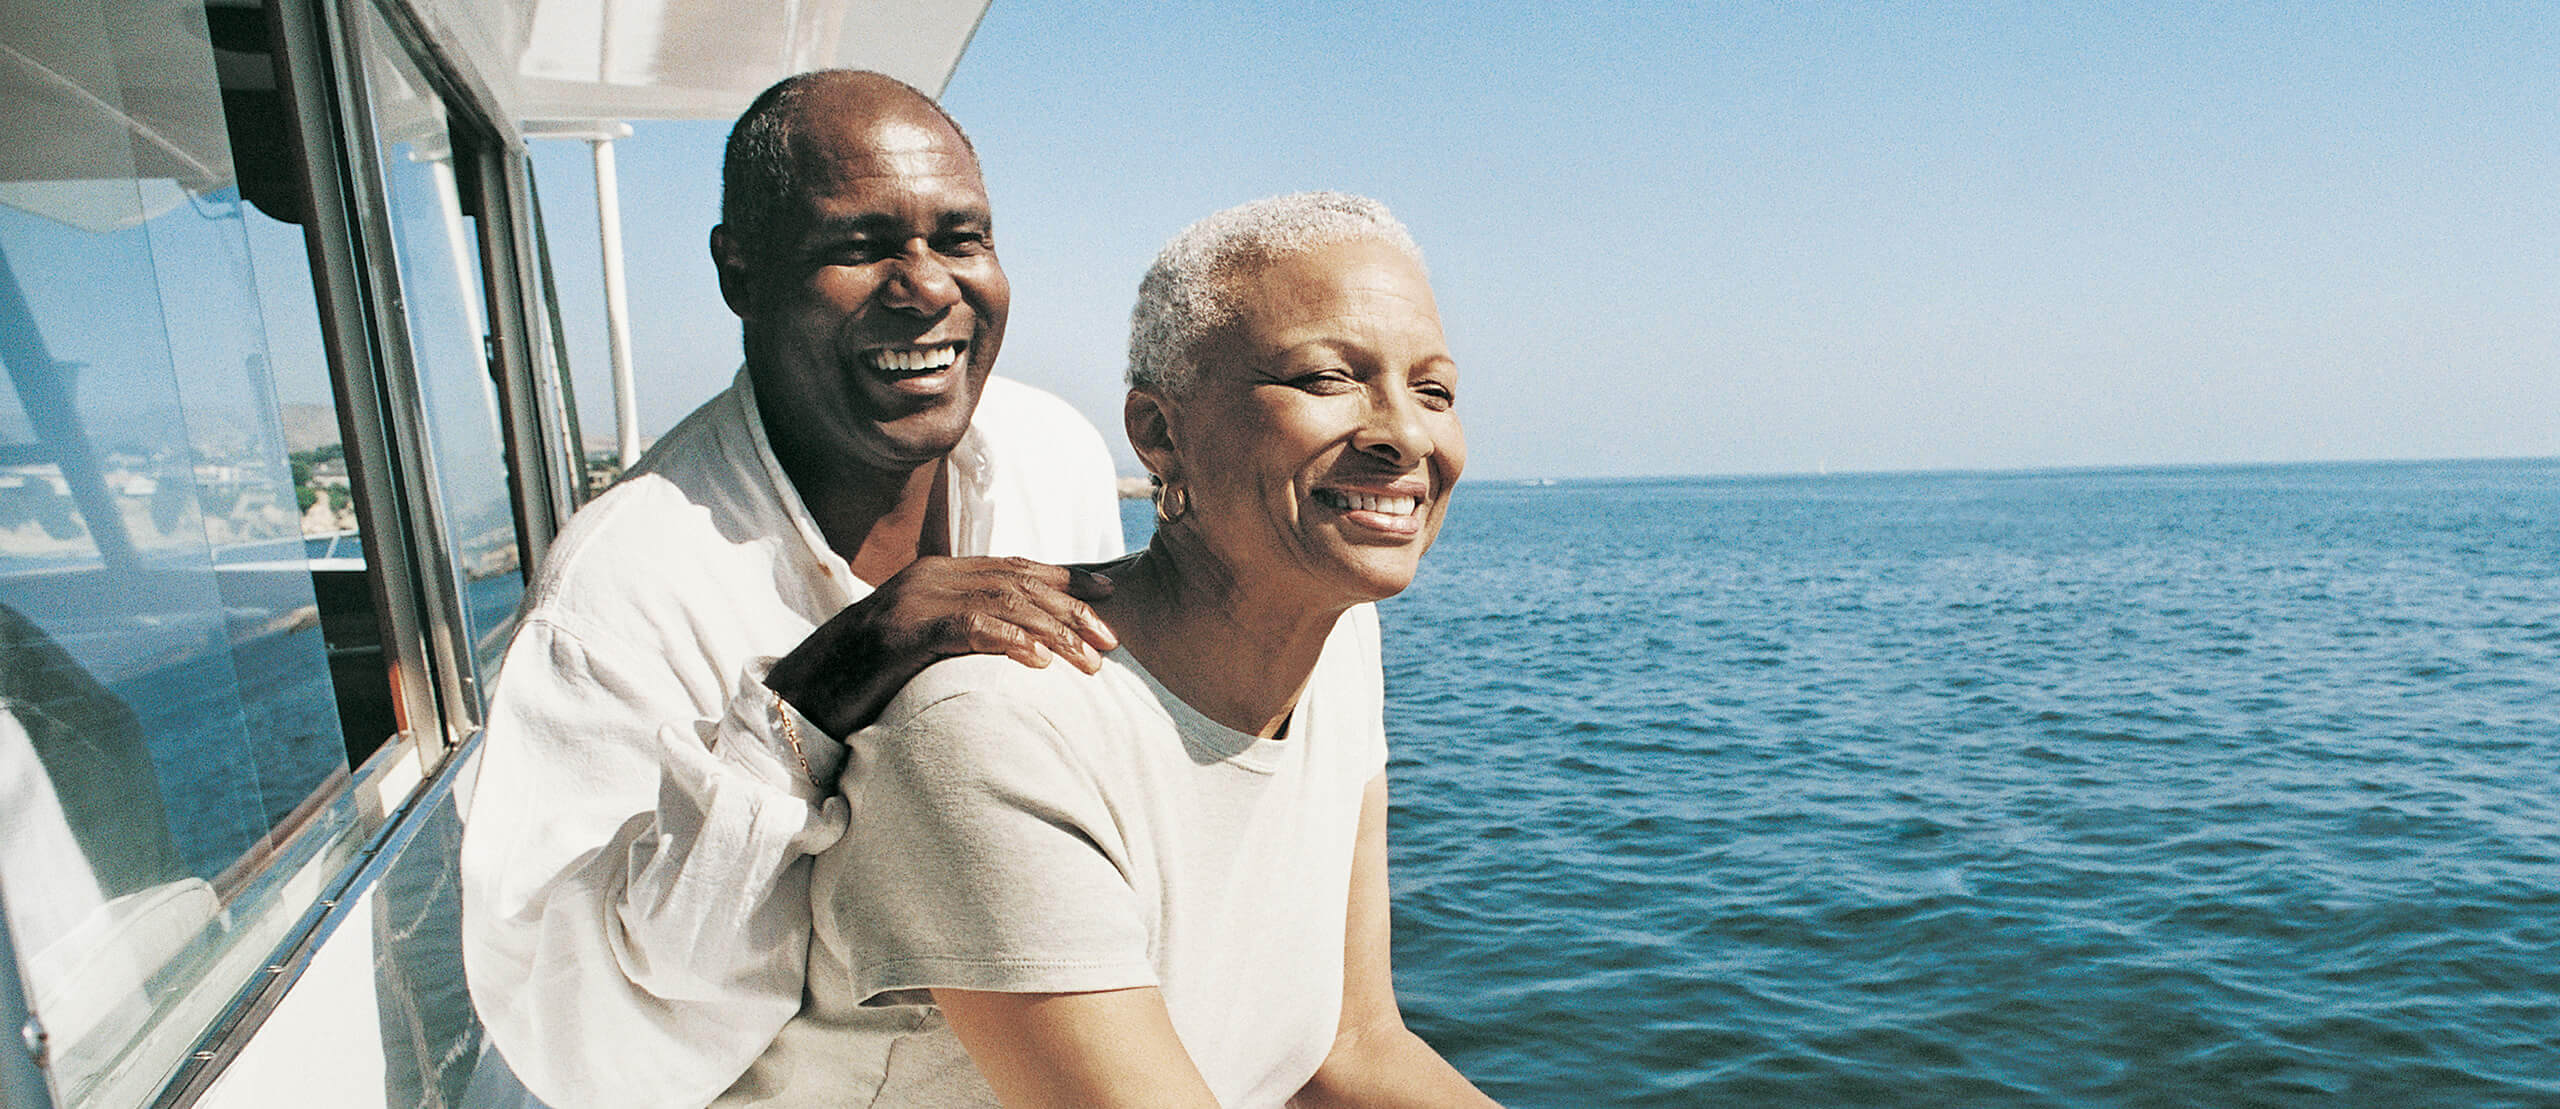 Older man and woman on a boat staring into the water